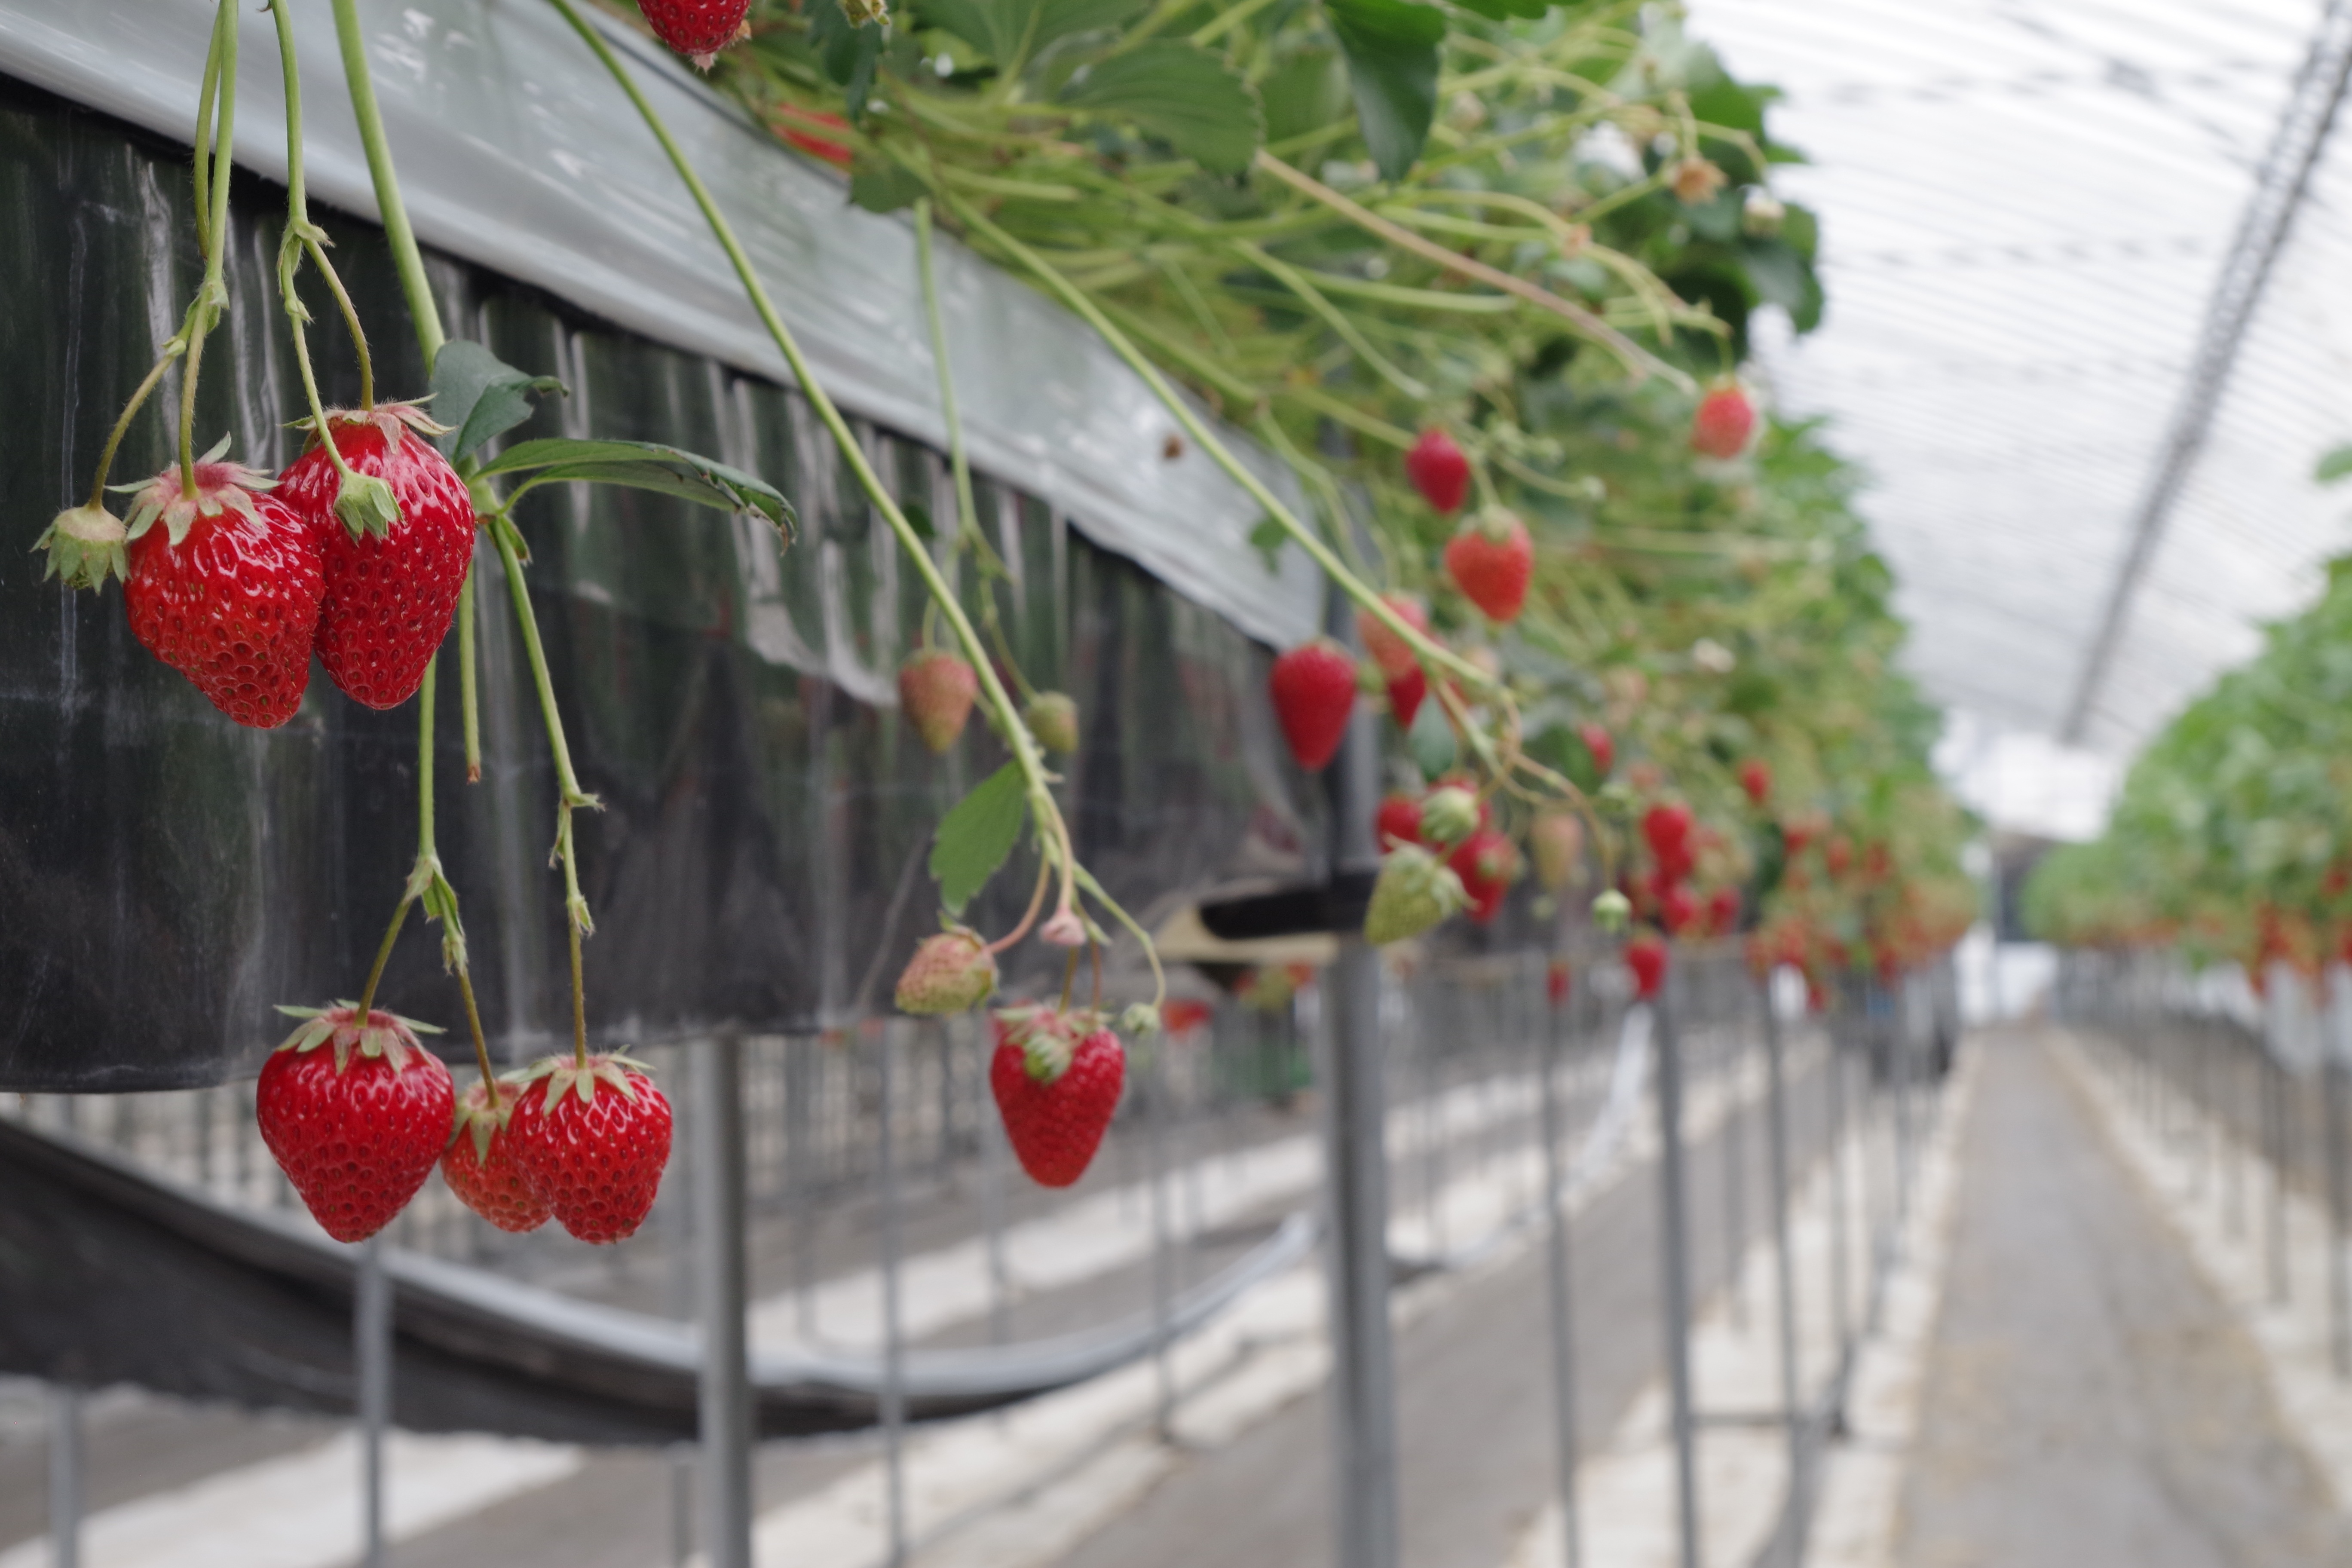 strawberries hang from a greenhouse trough